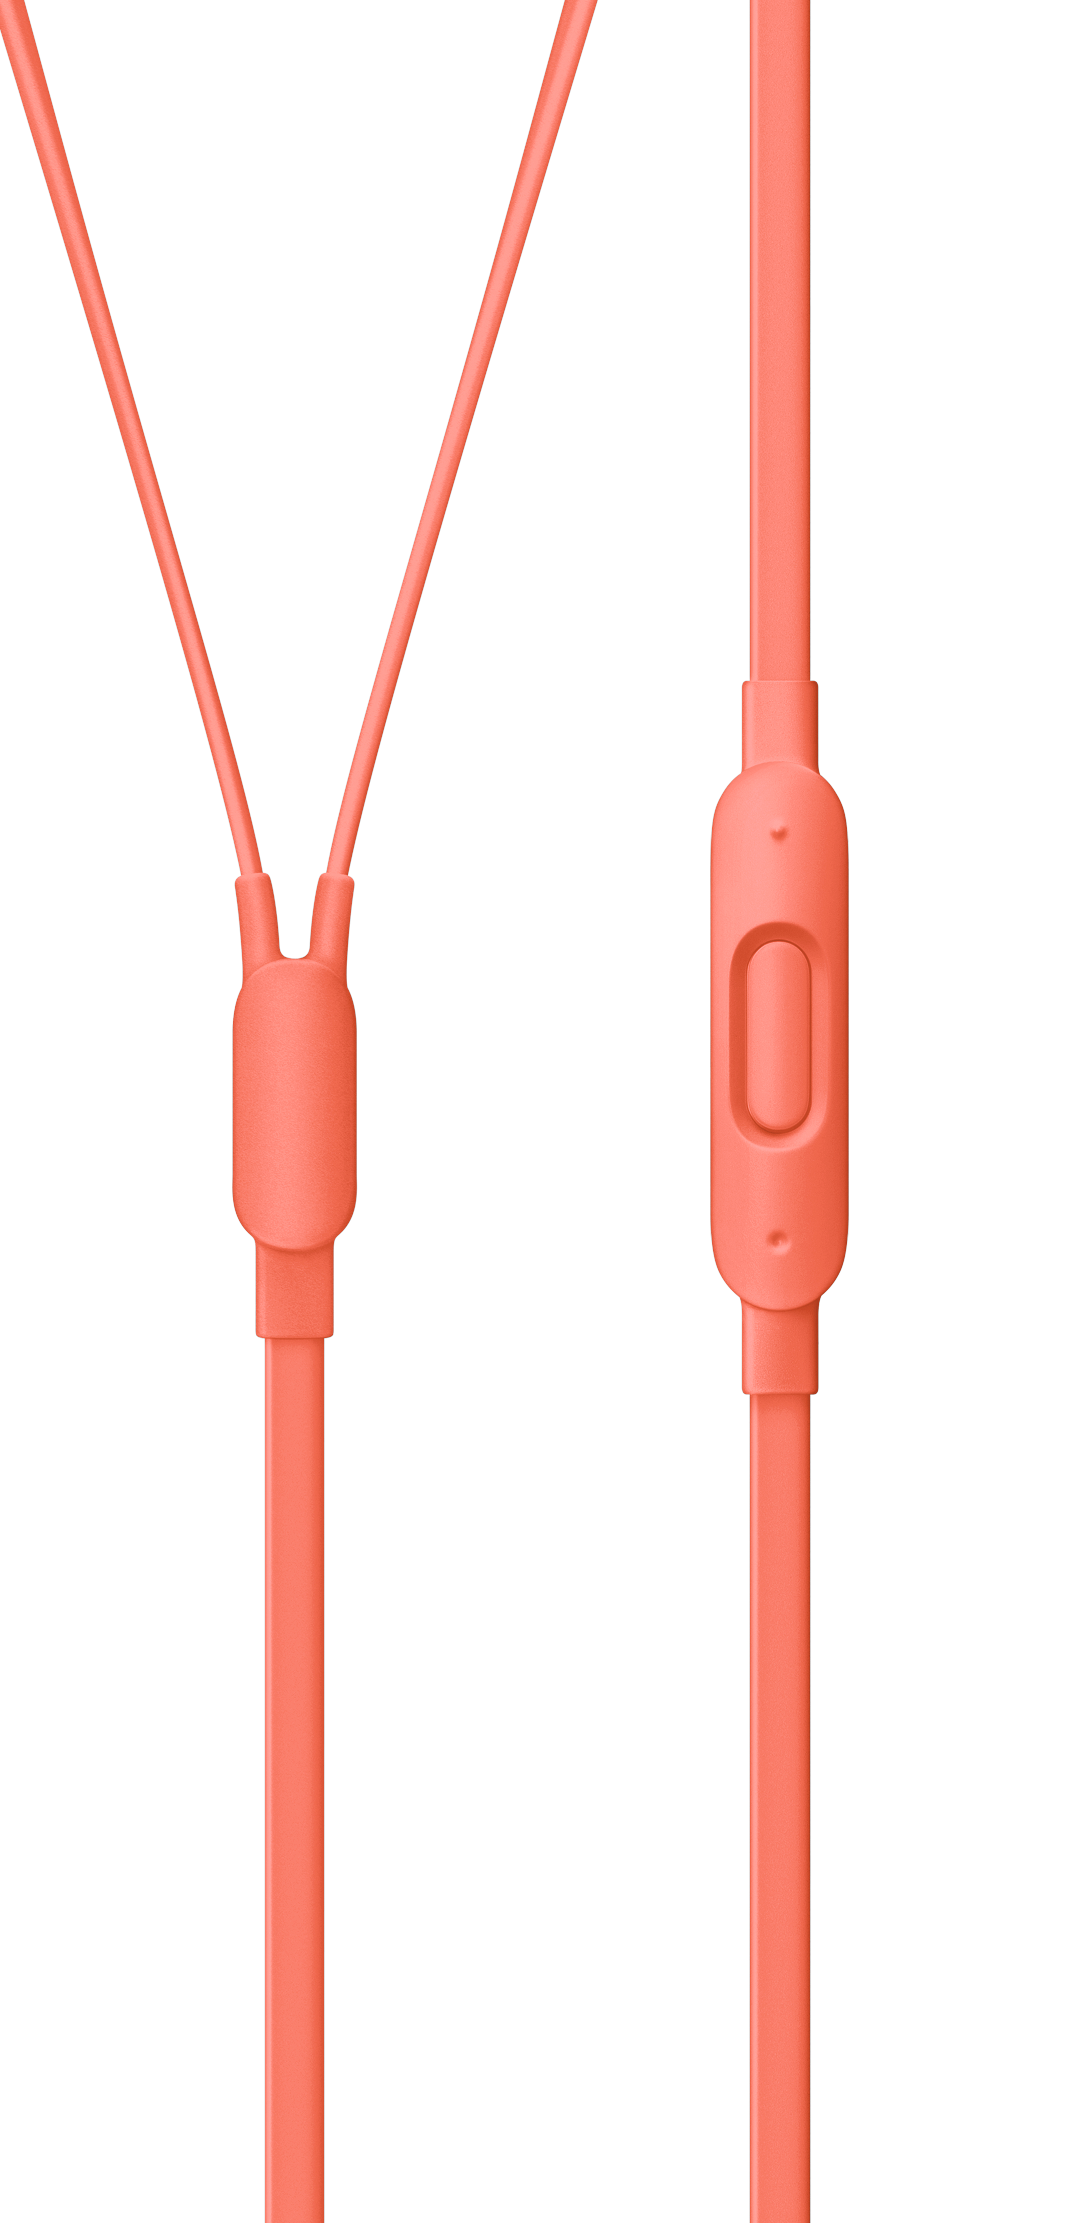 urBeats3 Earphones with Lightning Connector – Coral